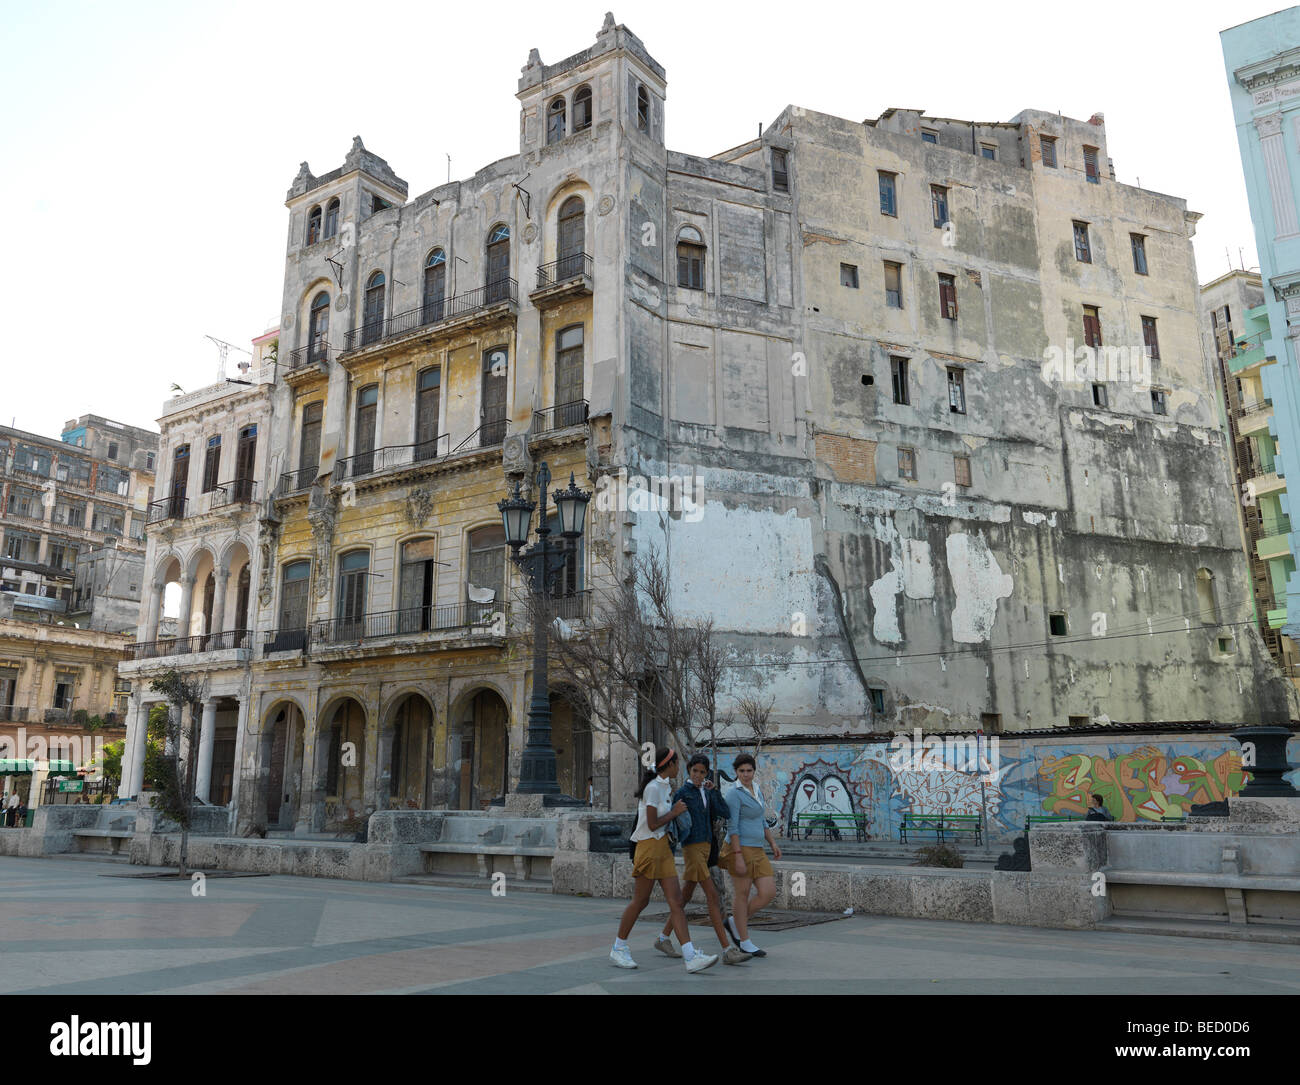 A historic building / house in the streets of Havanna, Cuba, pictured on March 1, 2009. Stock Photo